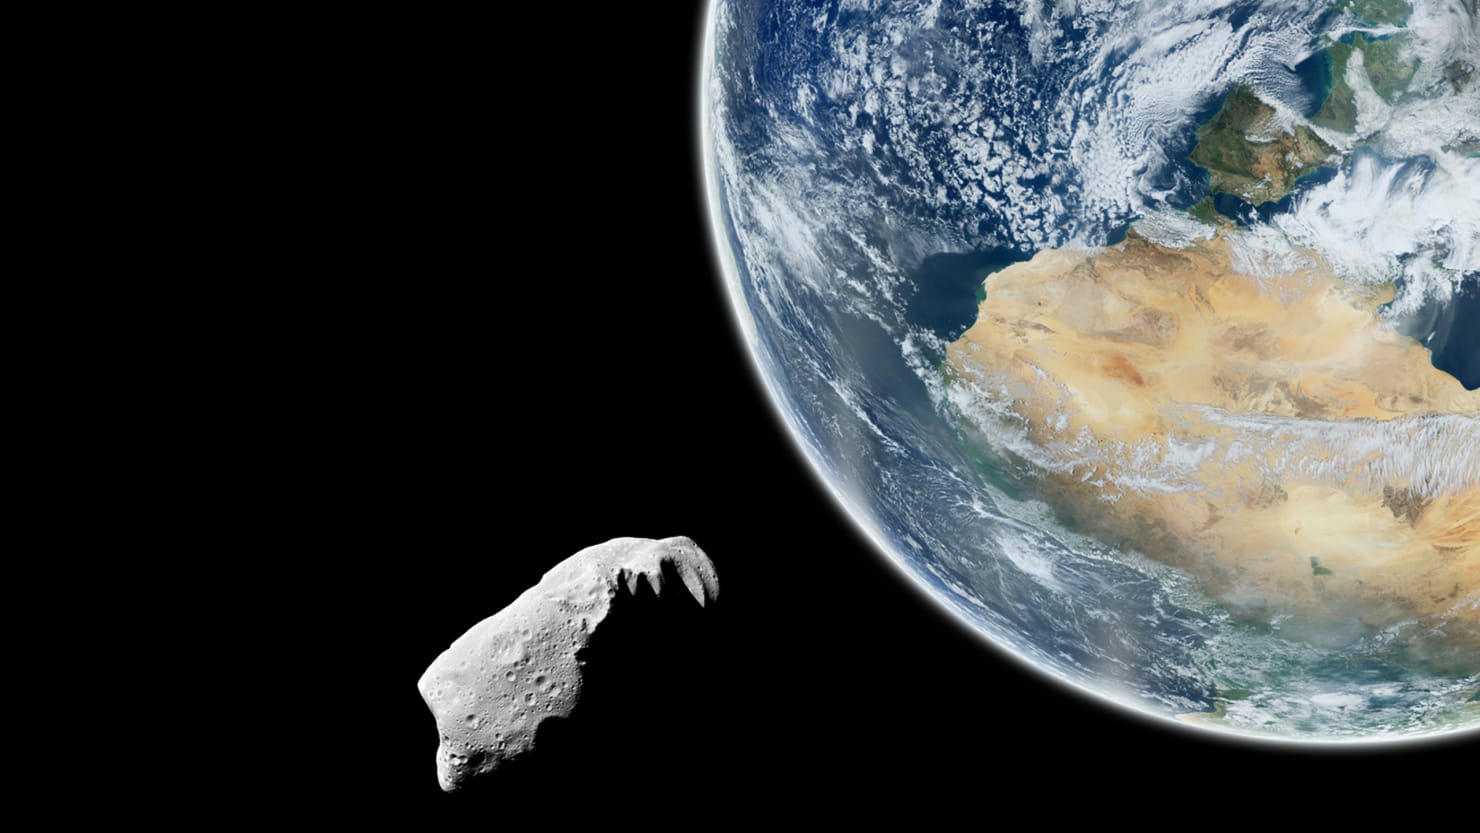 City Block-Sized Asteroid Comes Scarily Close to Earth